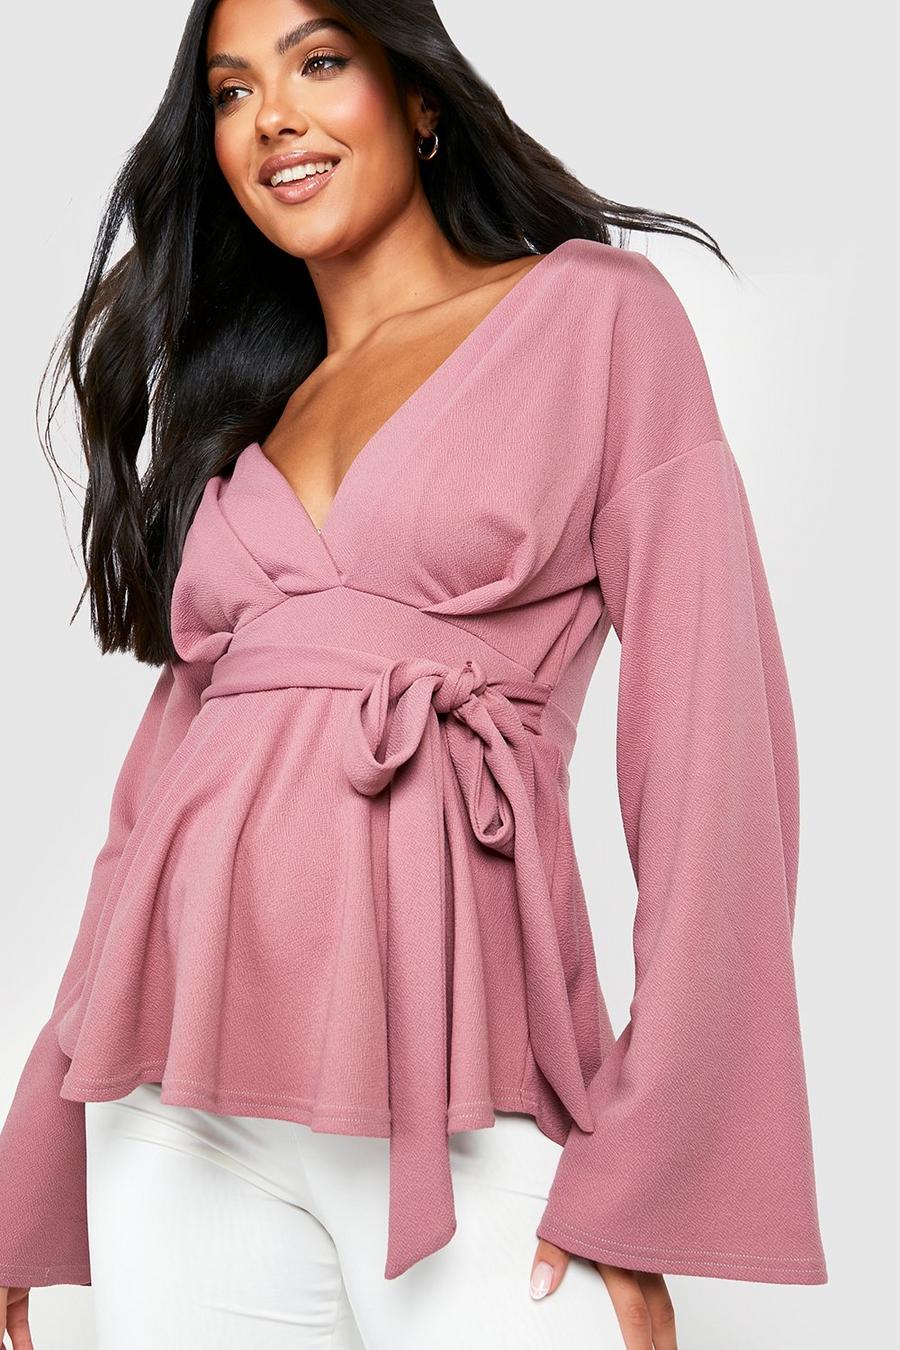 Mink beis Maternity Flare Sleeve Wrap Top